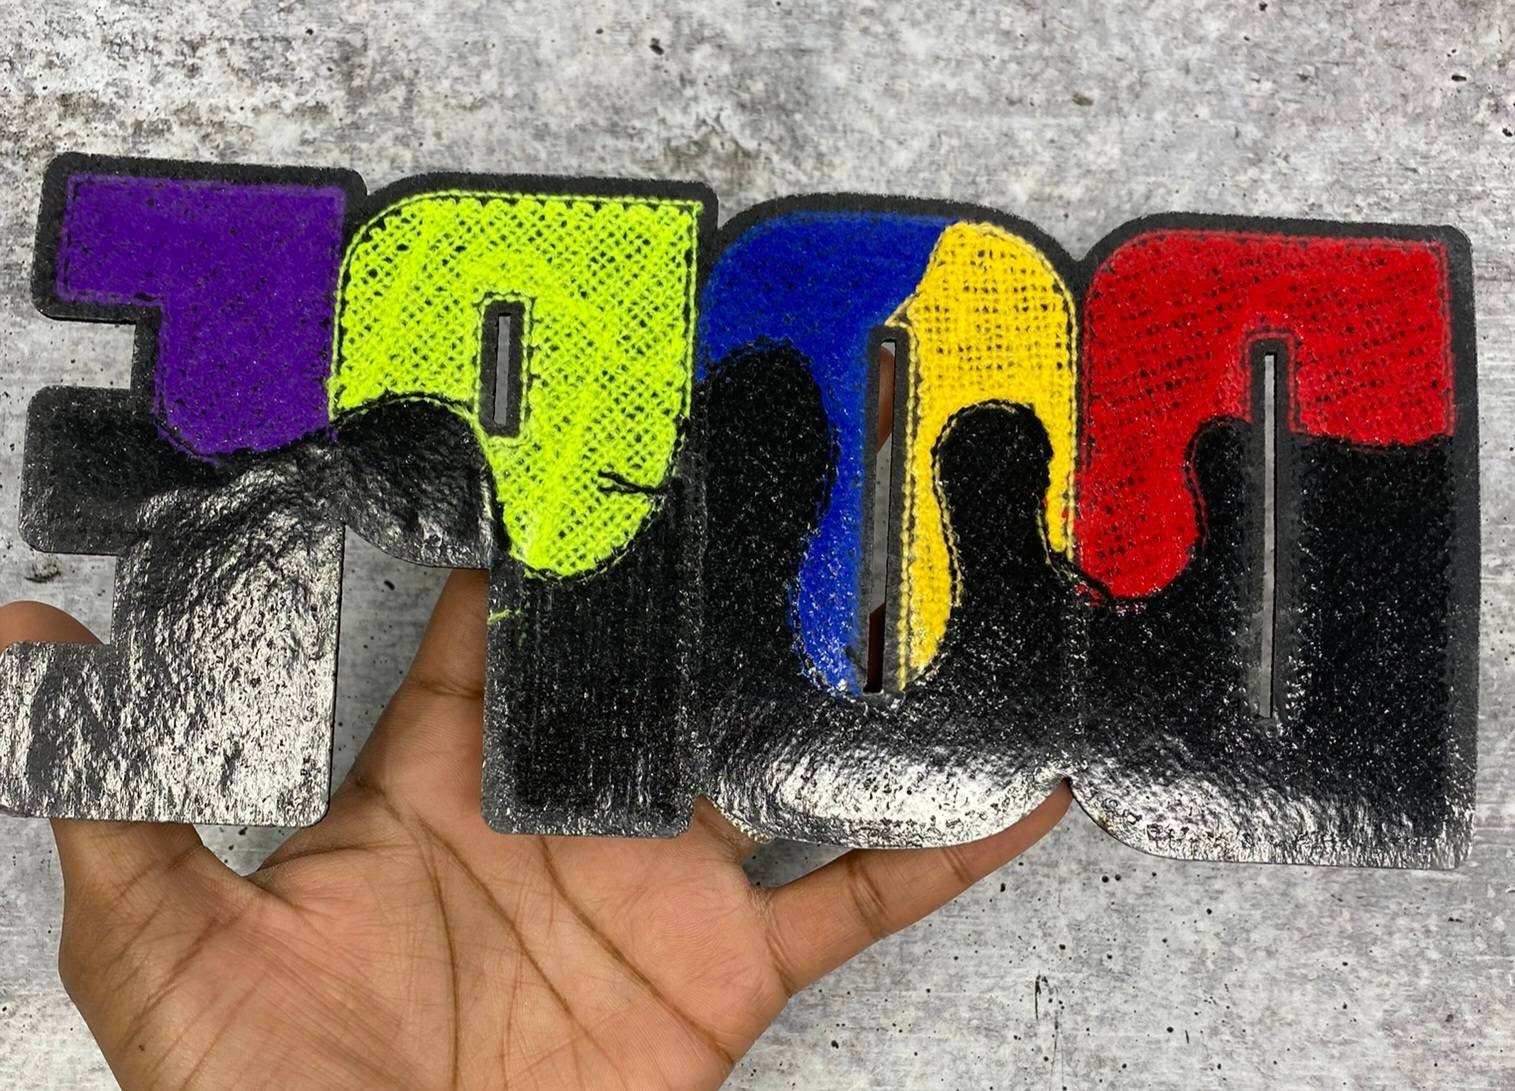 NEW, Large, 1-pc Colorful "DOPE" Chenille Iron On Patch, Size 9"x5", Large Patch for Varsity Jackets, Denim Jackets, Shirts, & Hoodies